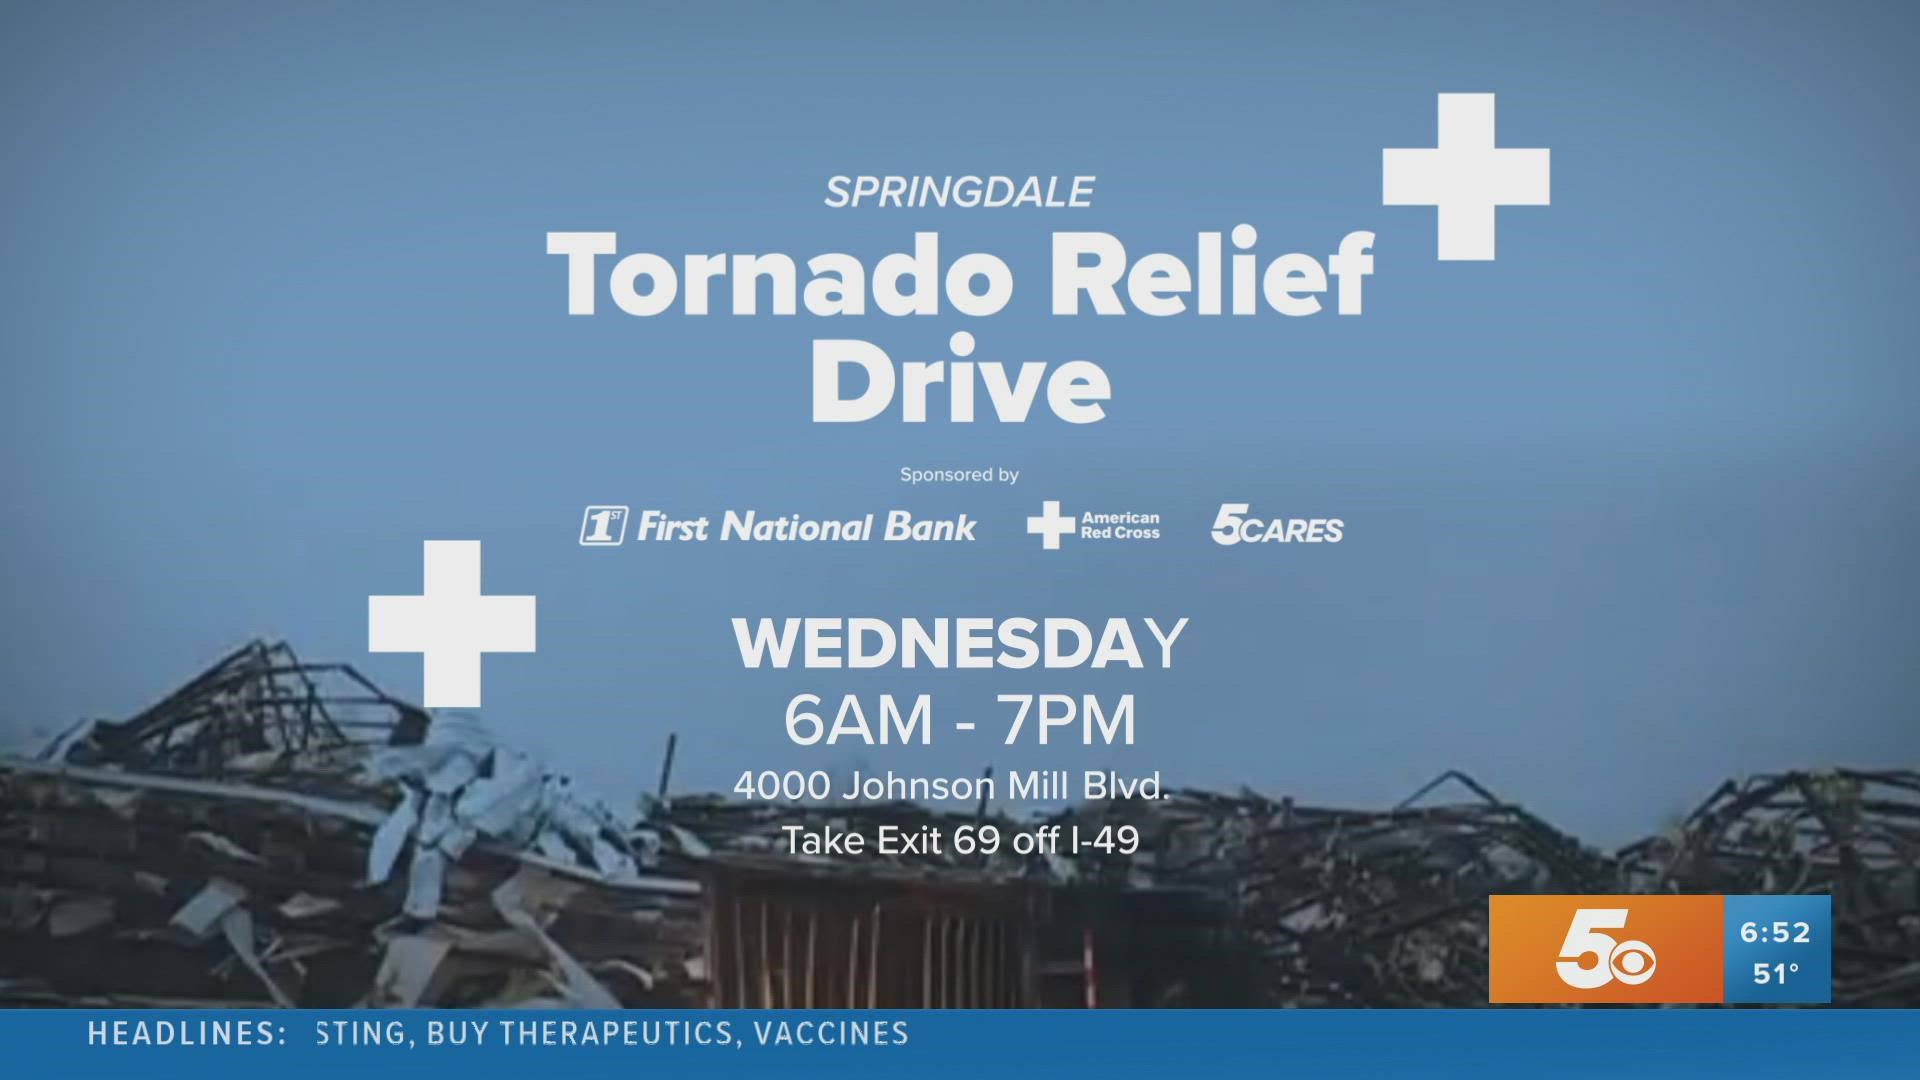 5NEWS, First National Bank and American Red Cross will be taking monetary donations to help tornado victims in Springdale.